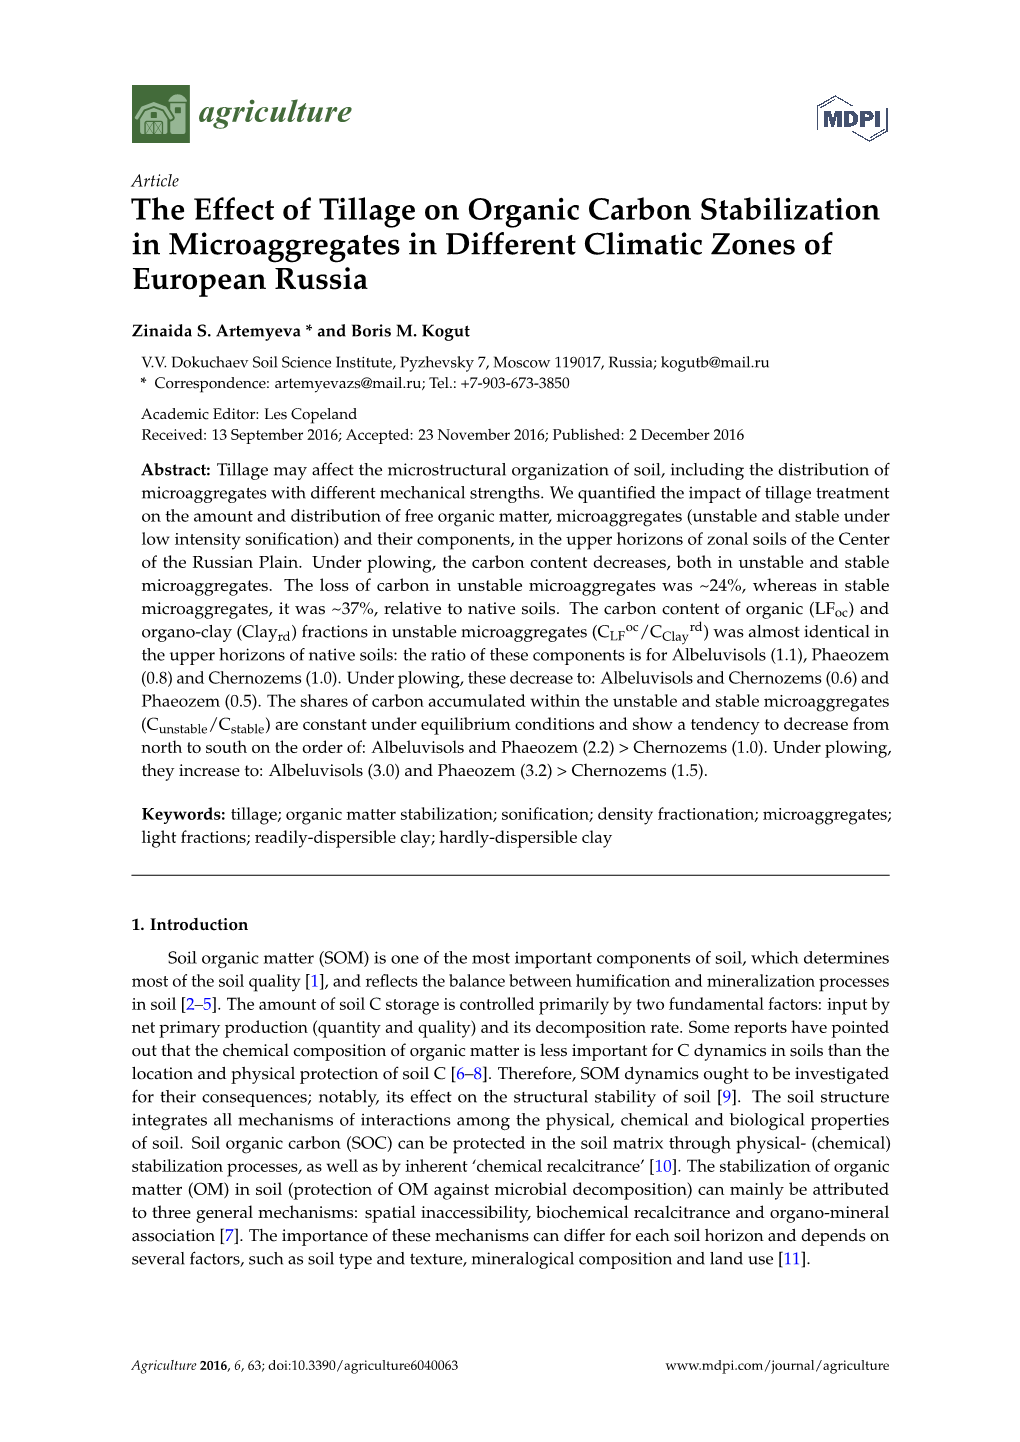 The Effect of Tillage on Organic Carbon Stabilization in Microaggregates in Different Climatic Zones of European Russia